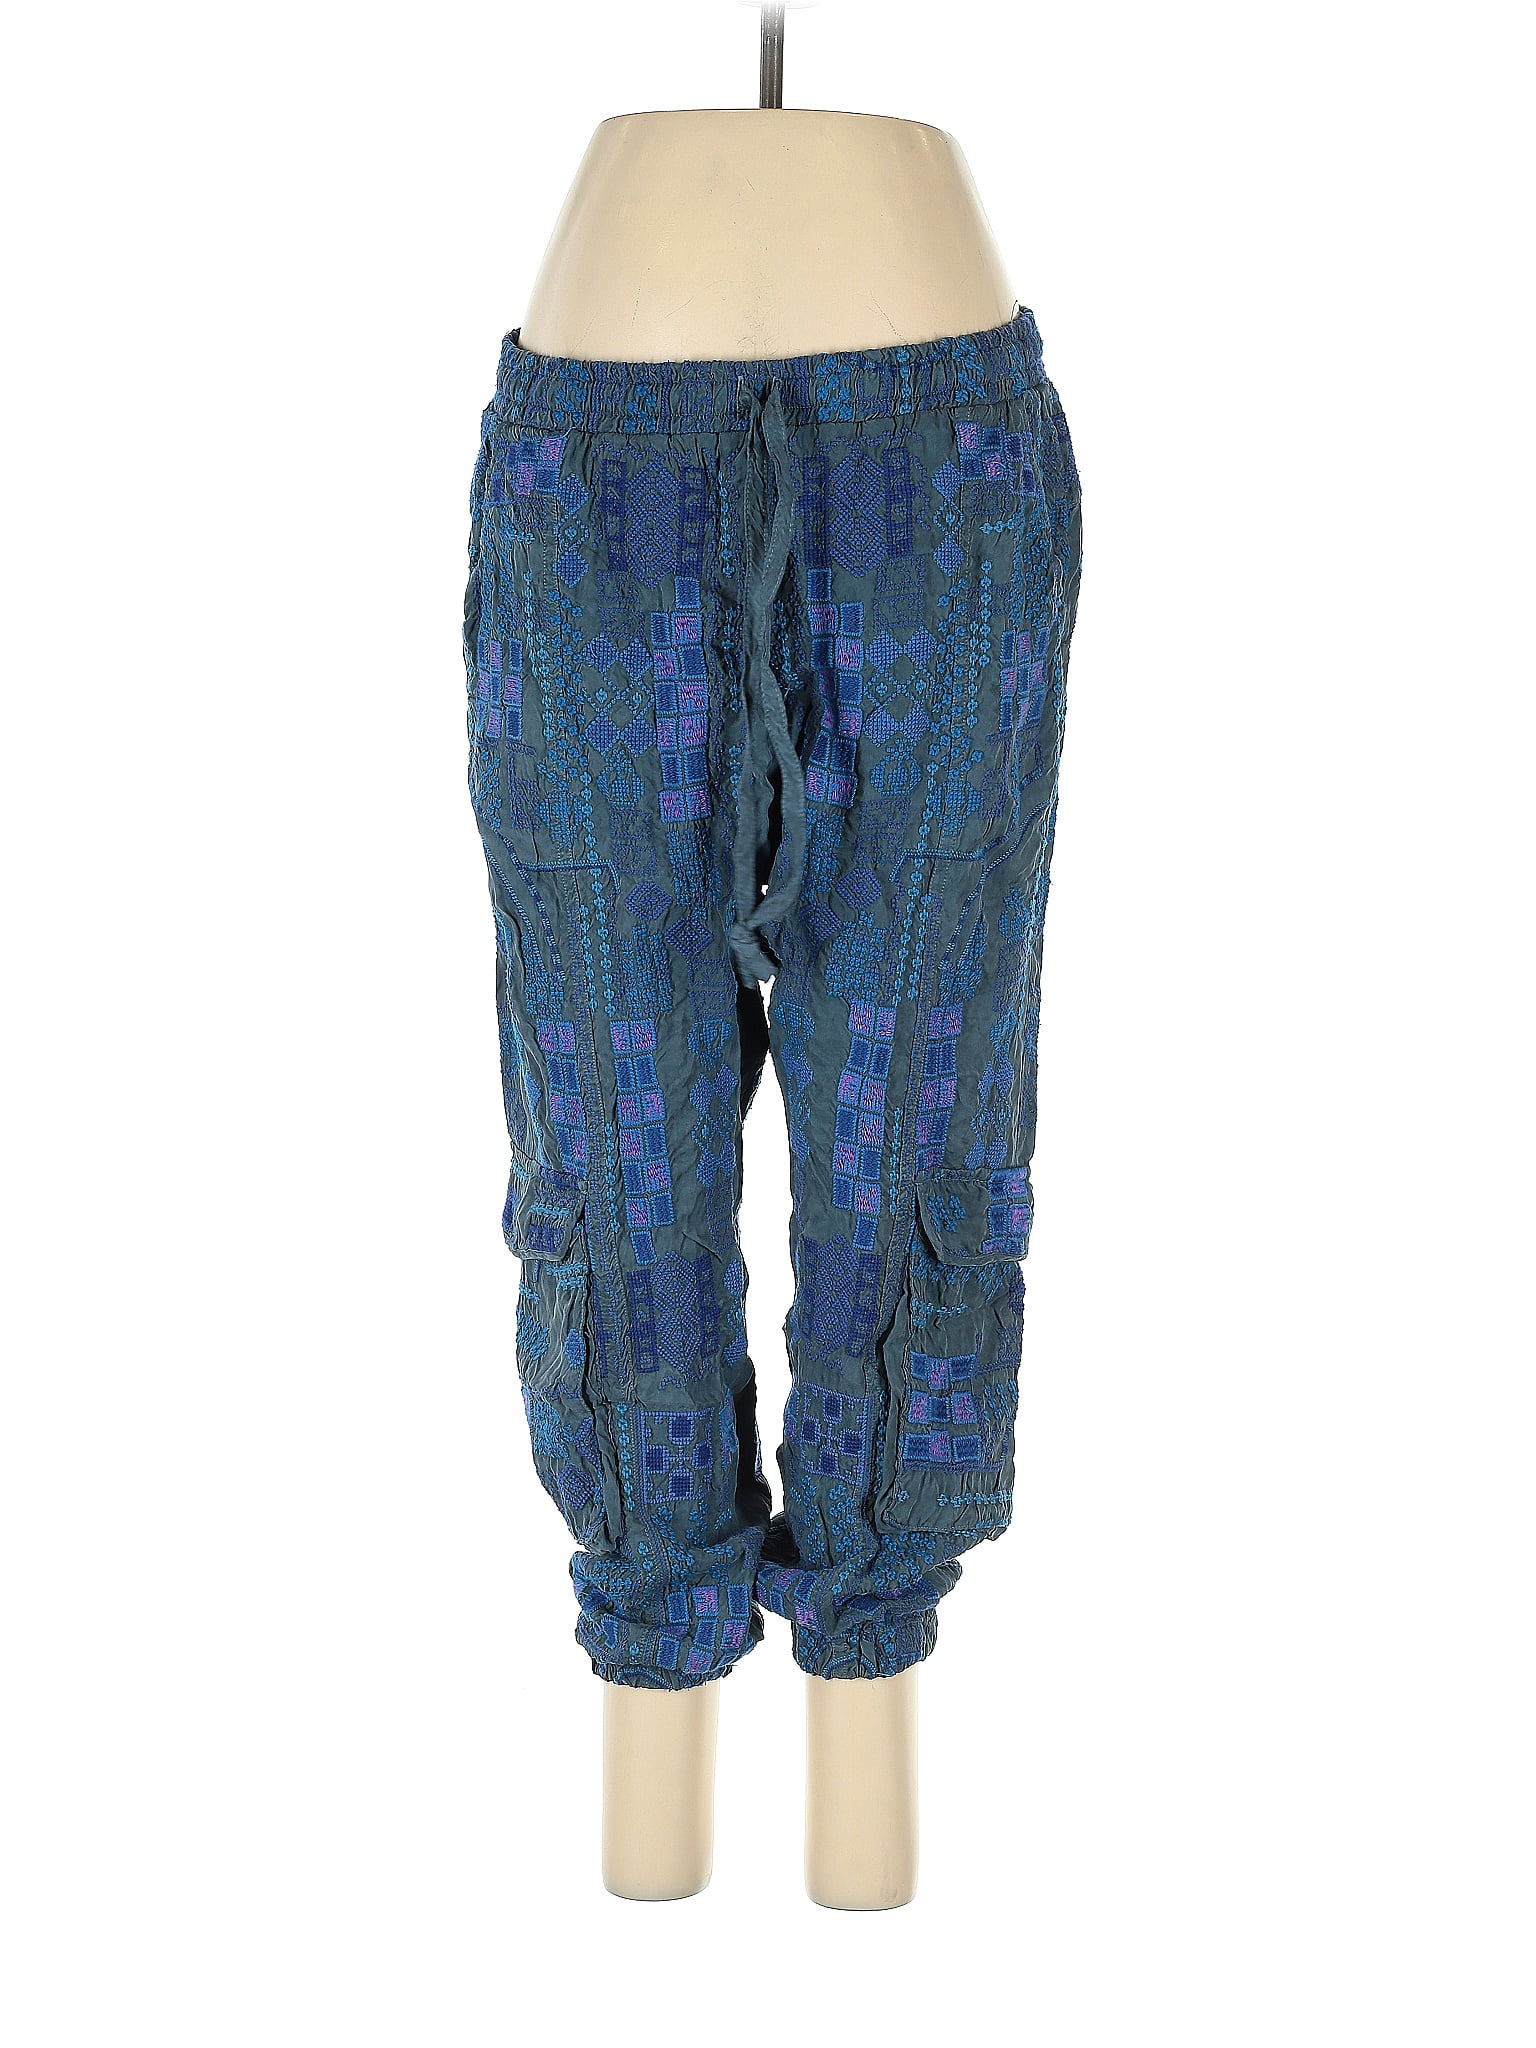 Johnny Was Snake Print Blue Casual Pants Size M - 82% off | thredUP